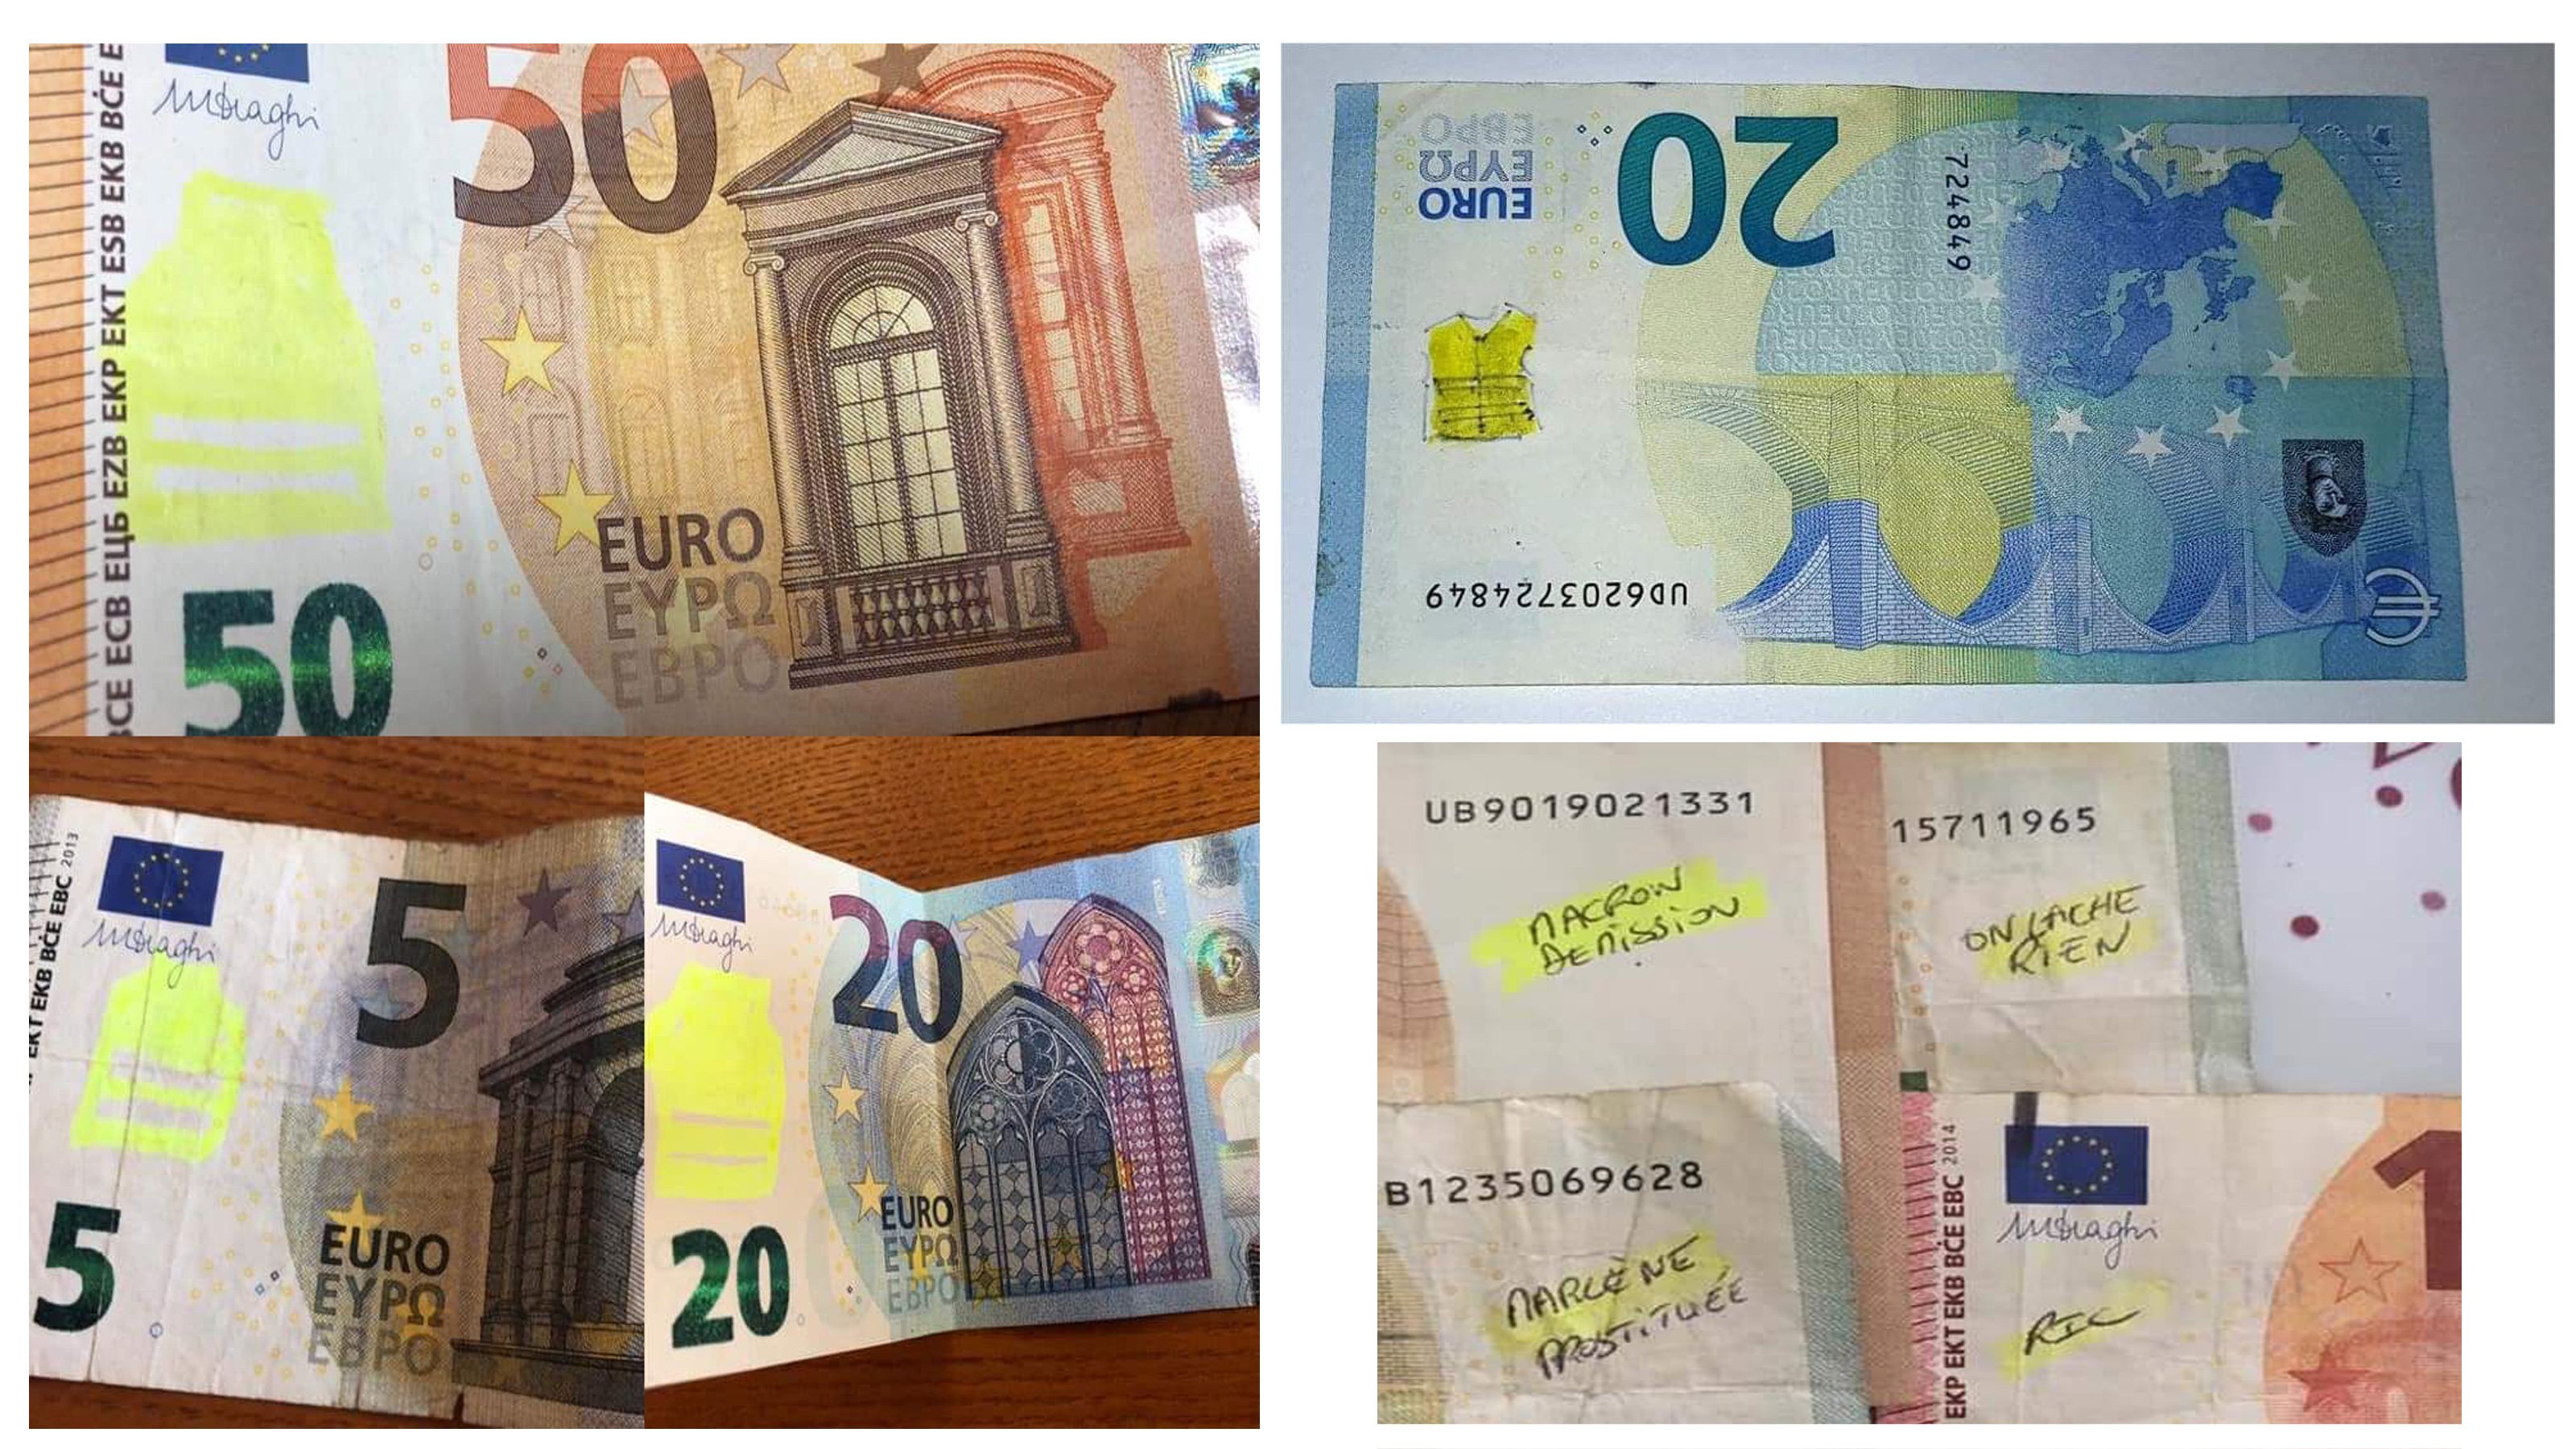 Yellow Vest Movement Starts a New Form of Protest — Burning Banknotes